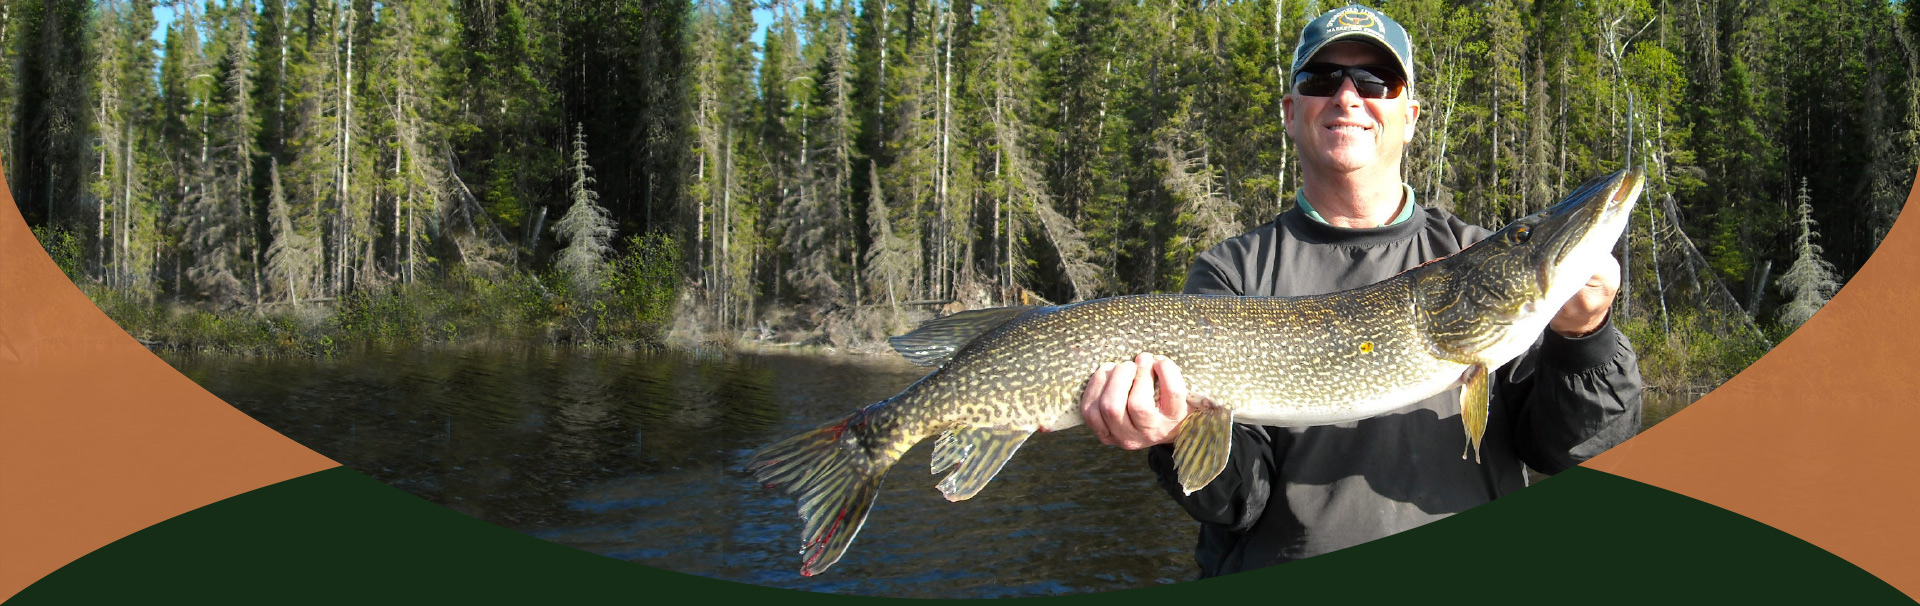 Northern Pike Fish Caught